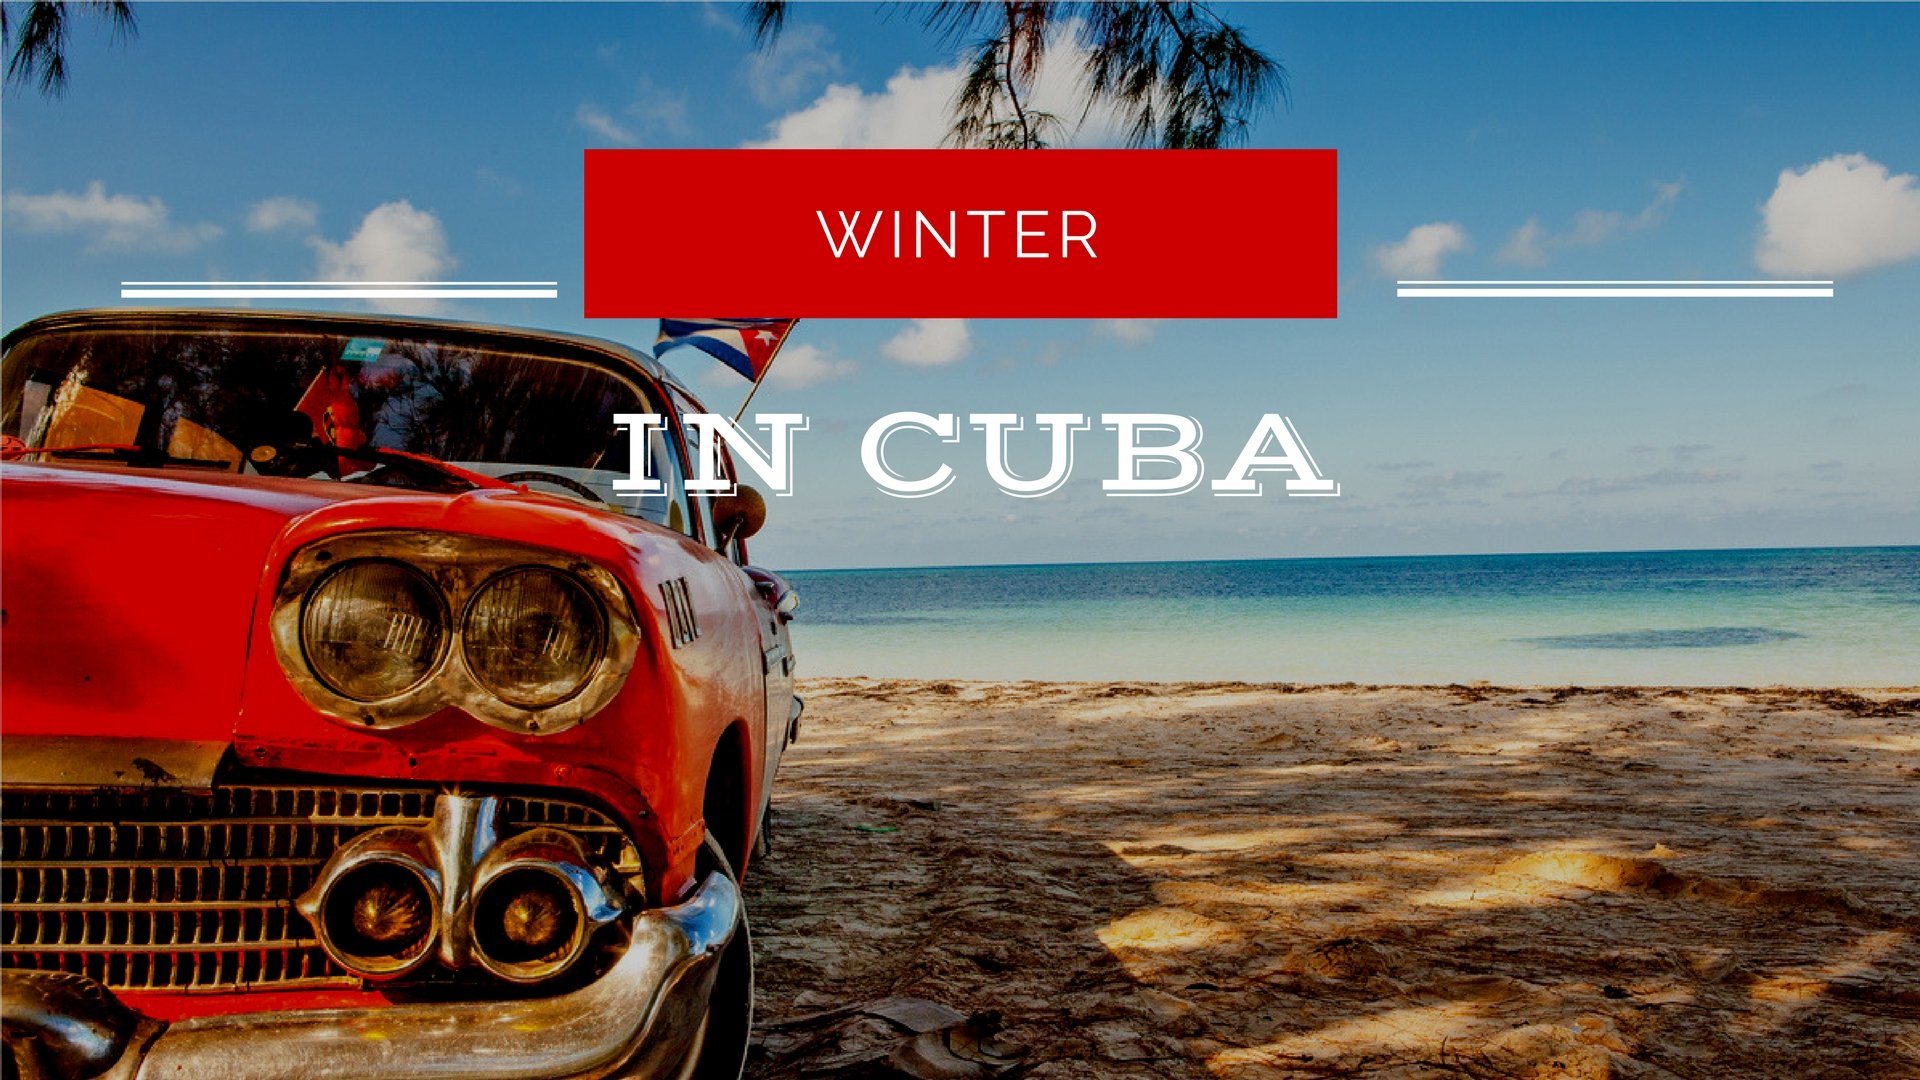 Why is it worth traveling to Cuba in winter?